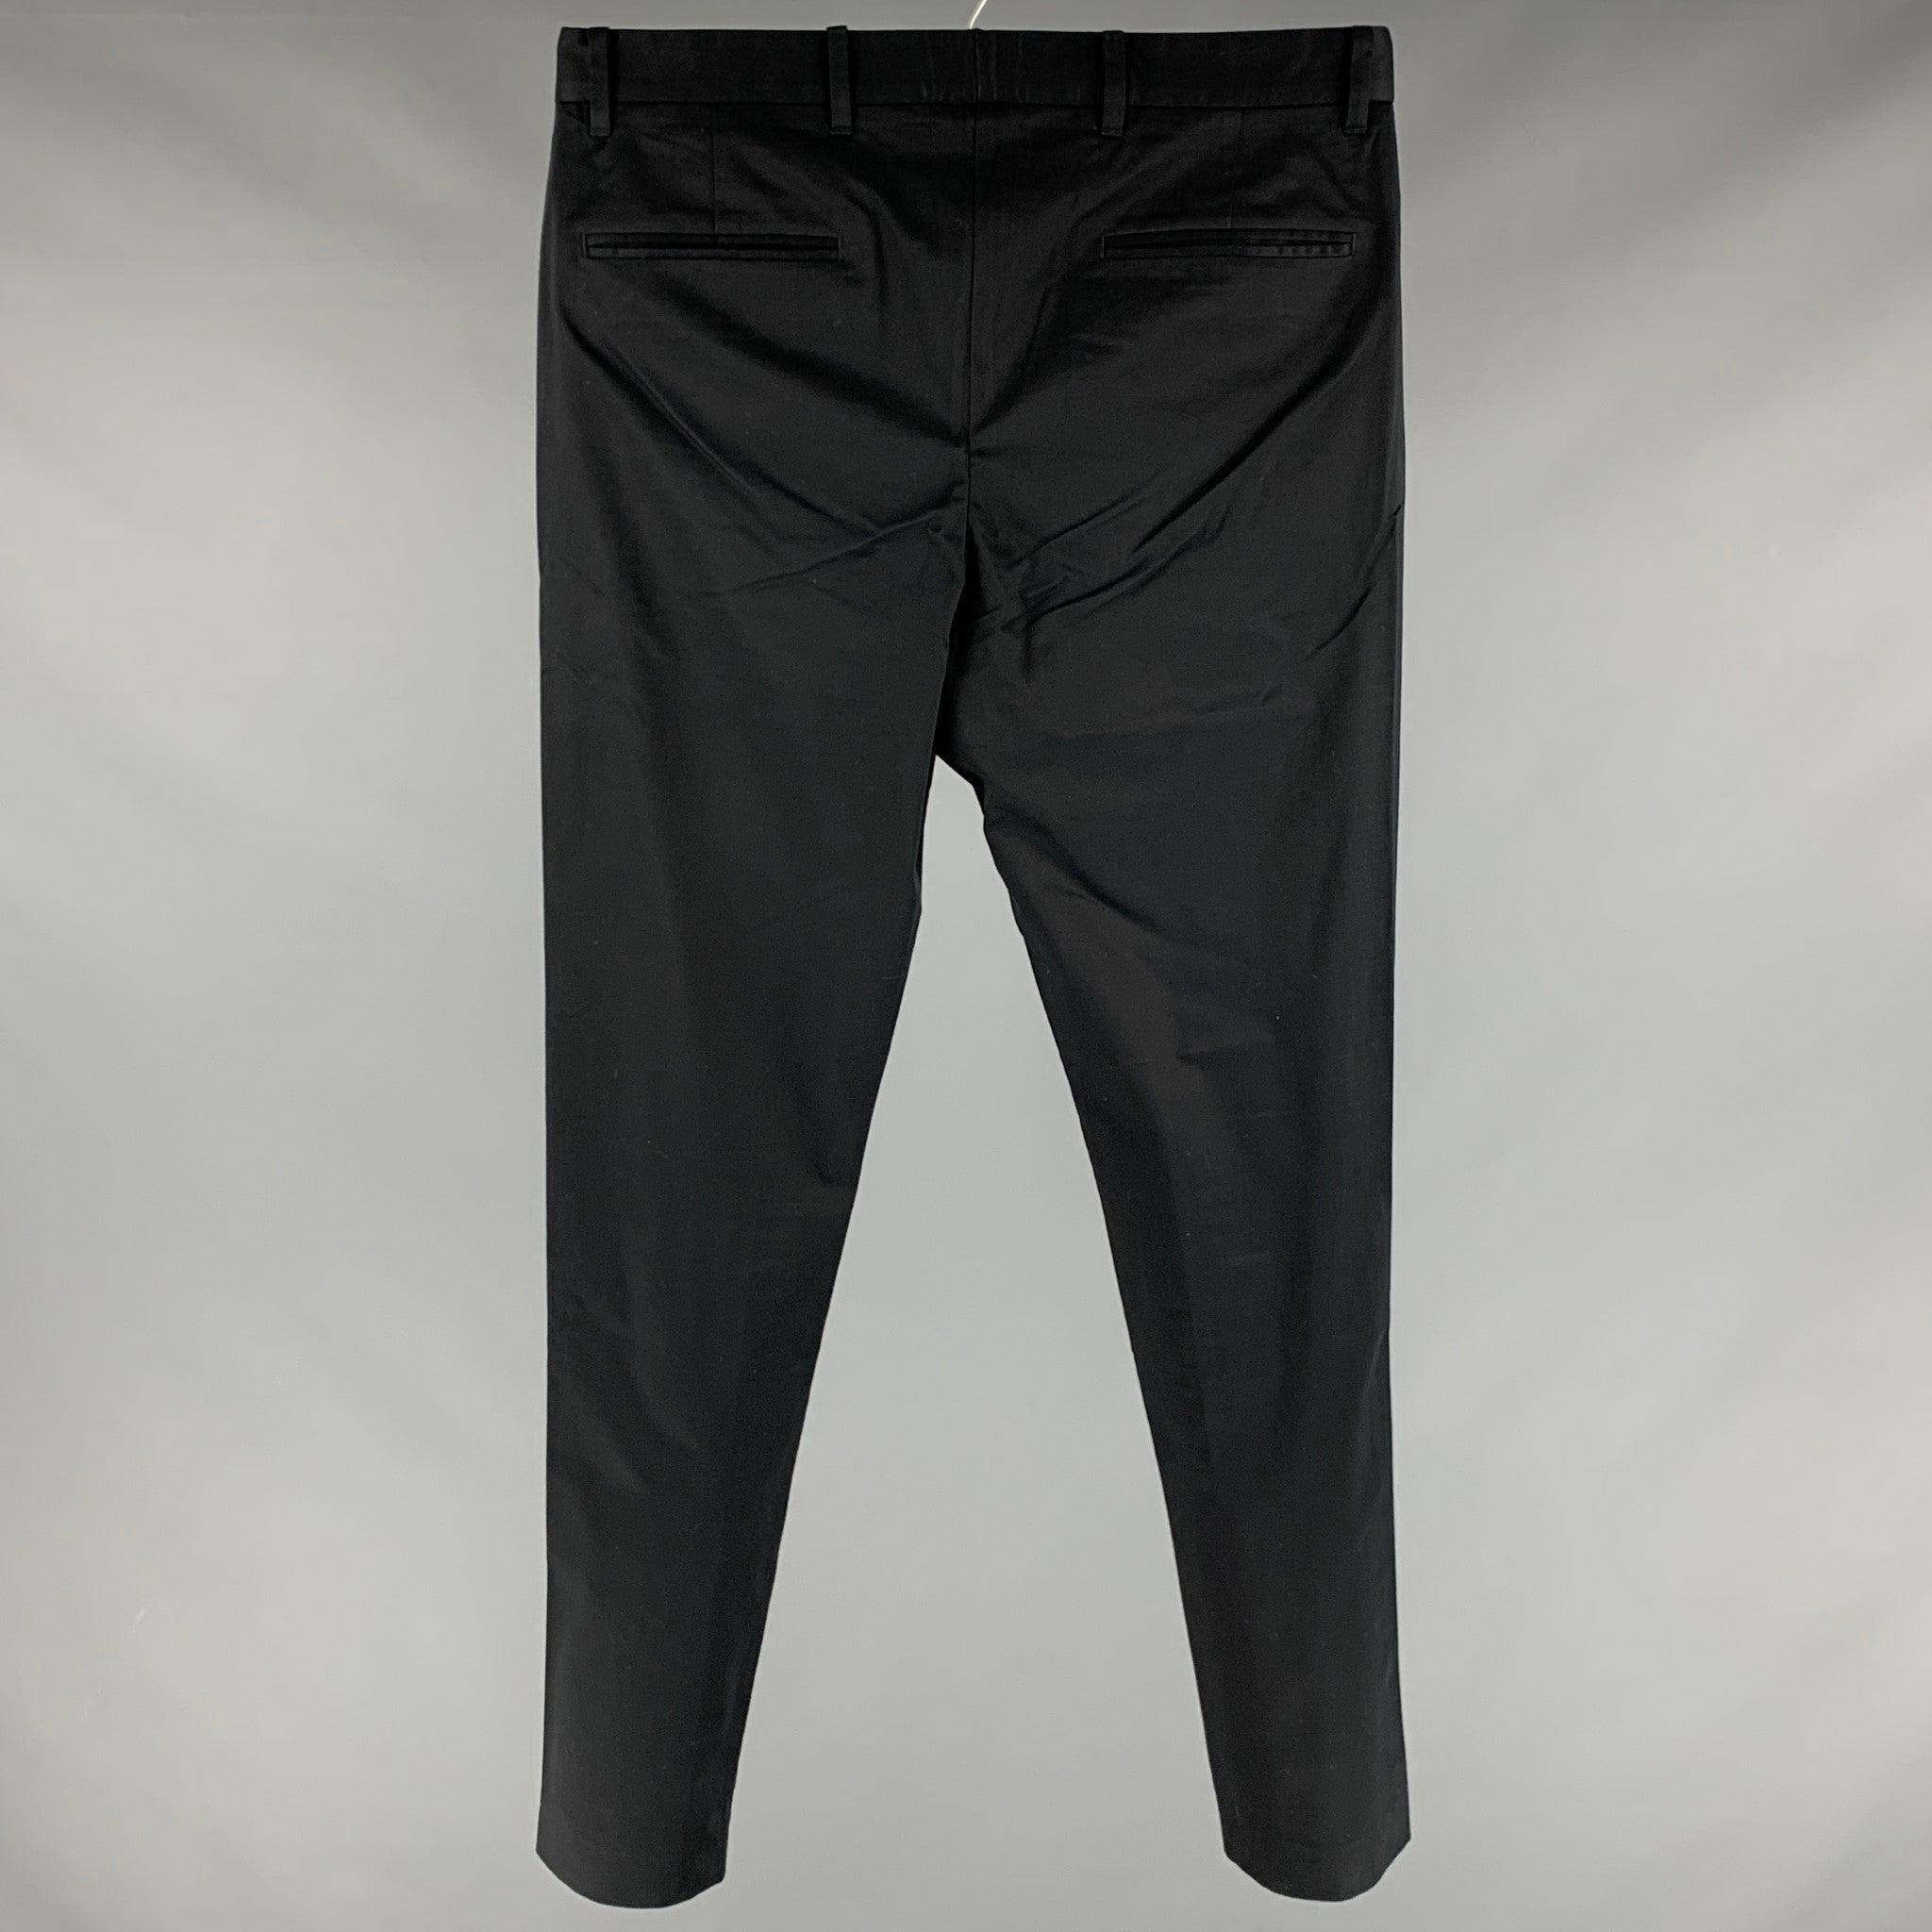 JOHN VARVATOS casual pants
in a black cotton blend featuring flat front style, and zip fly closure. This item has been altered.Excellent Pre-Owned Condition. 

Marked:   46 

Measurements: 
  Waist: 33 inches Rise: 9 inches Inseam: 32 inches Leg